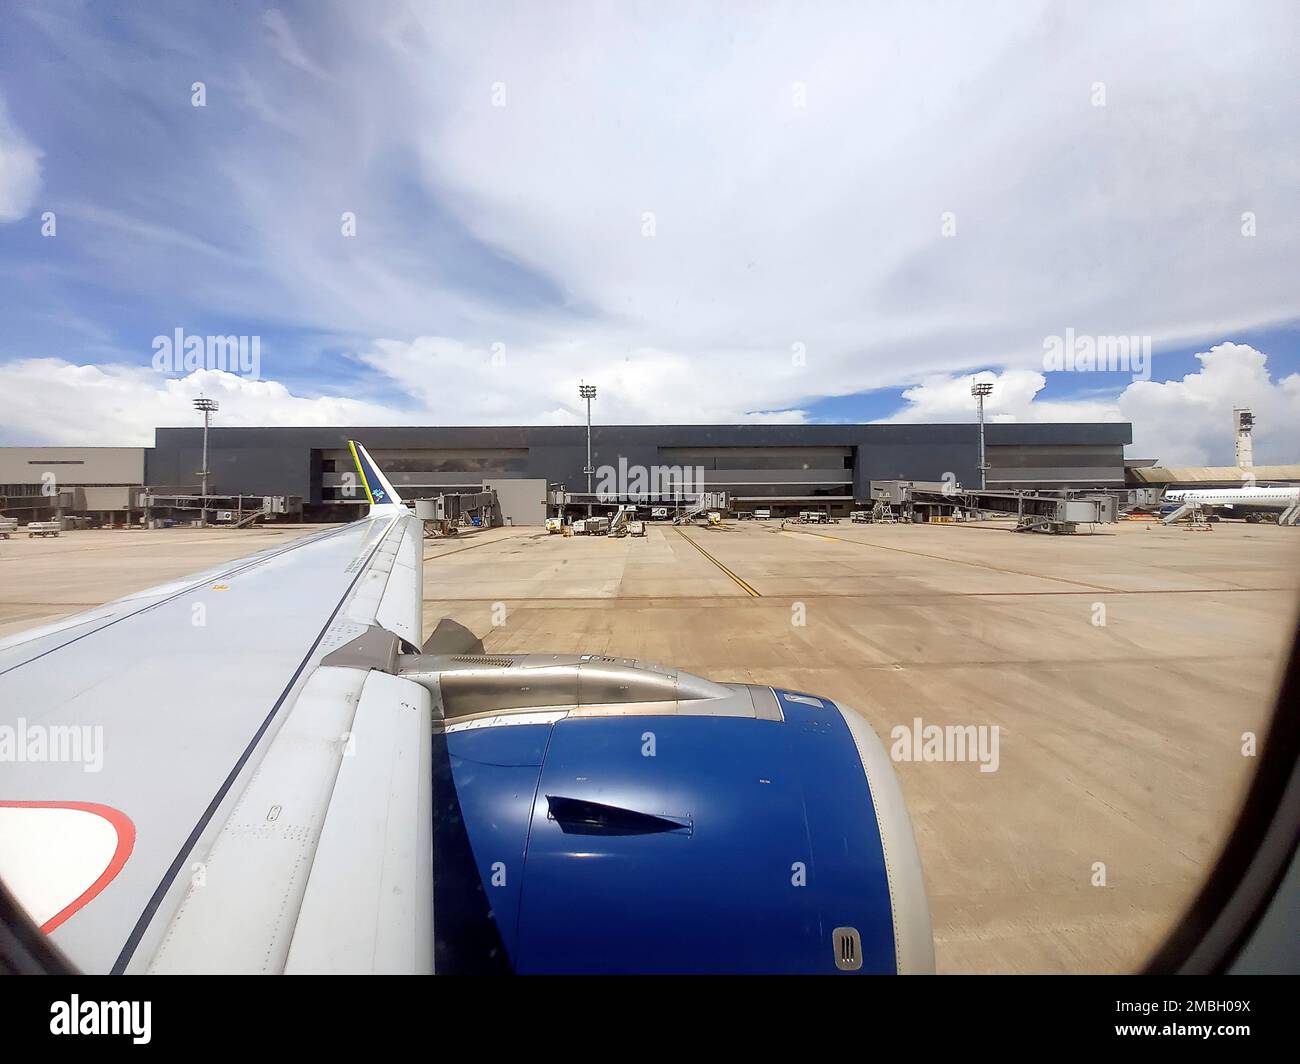 Confins, MG, Brazil - January 11, 2023:  Azul airline airplane at Confins airport, Belo Horizonte - view from inside the plane Stock Photo